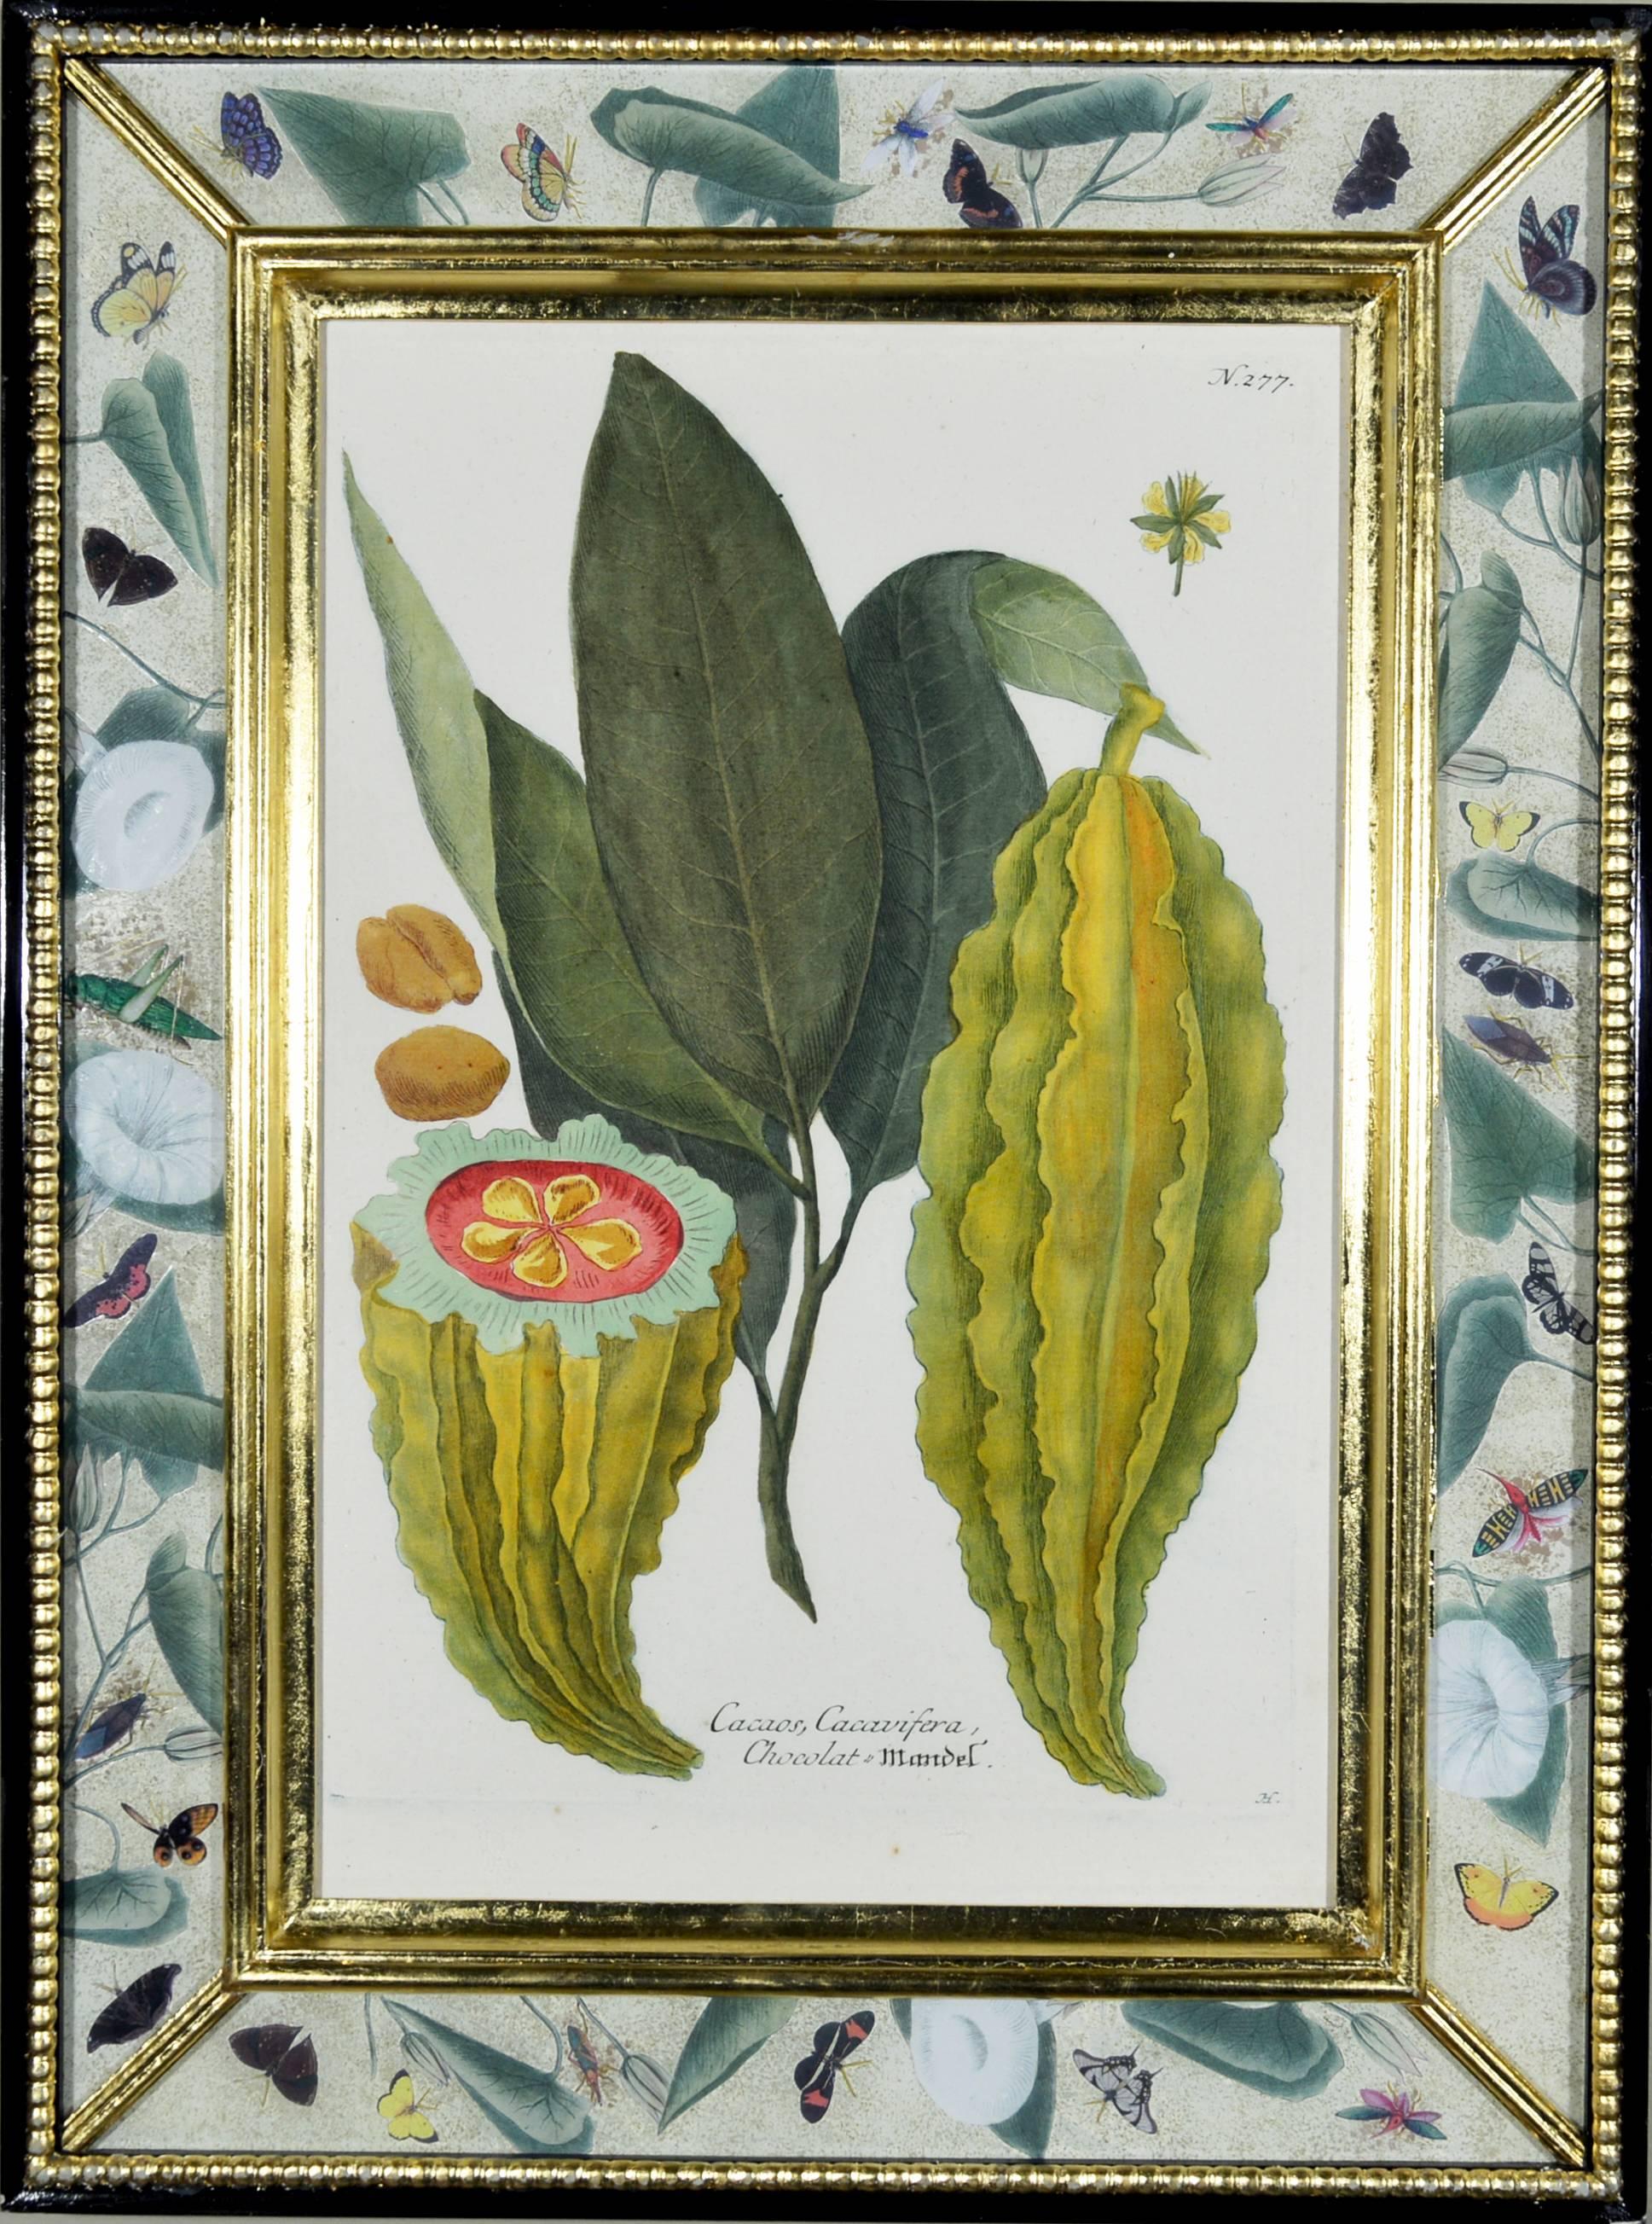 Set of six engravings,
from Phytanthoza Iconographia, Regensburg,
Johann Wilhelm Weinmann,
circa 1740

An outstanding collection of twelve hand-finished engravings of exotic plants from one of the most important botanical studies of the 18th